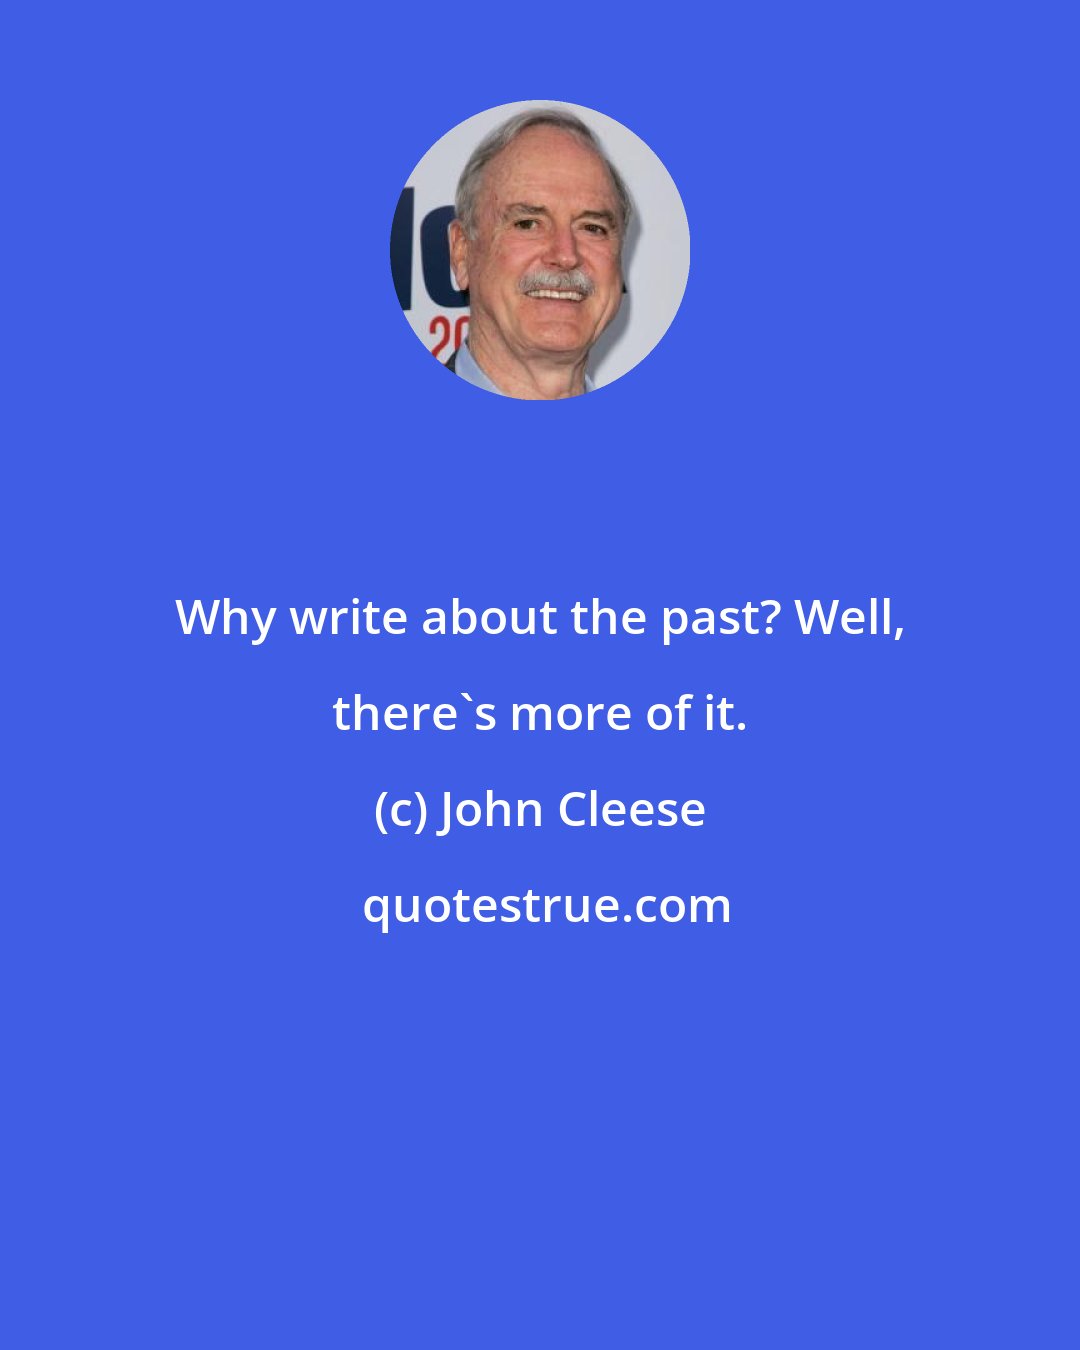 John Cleese: Why write about the past? Well, there's more of it.